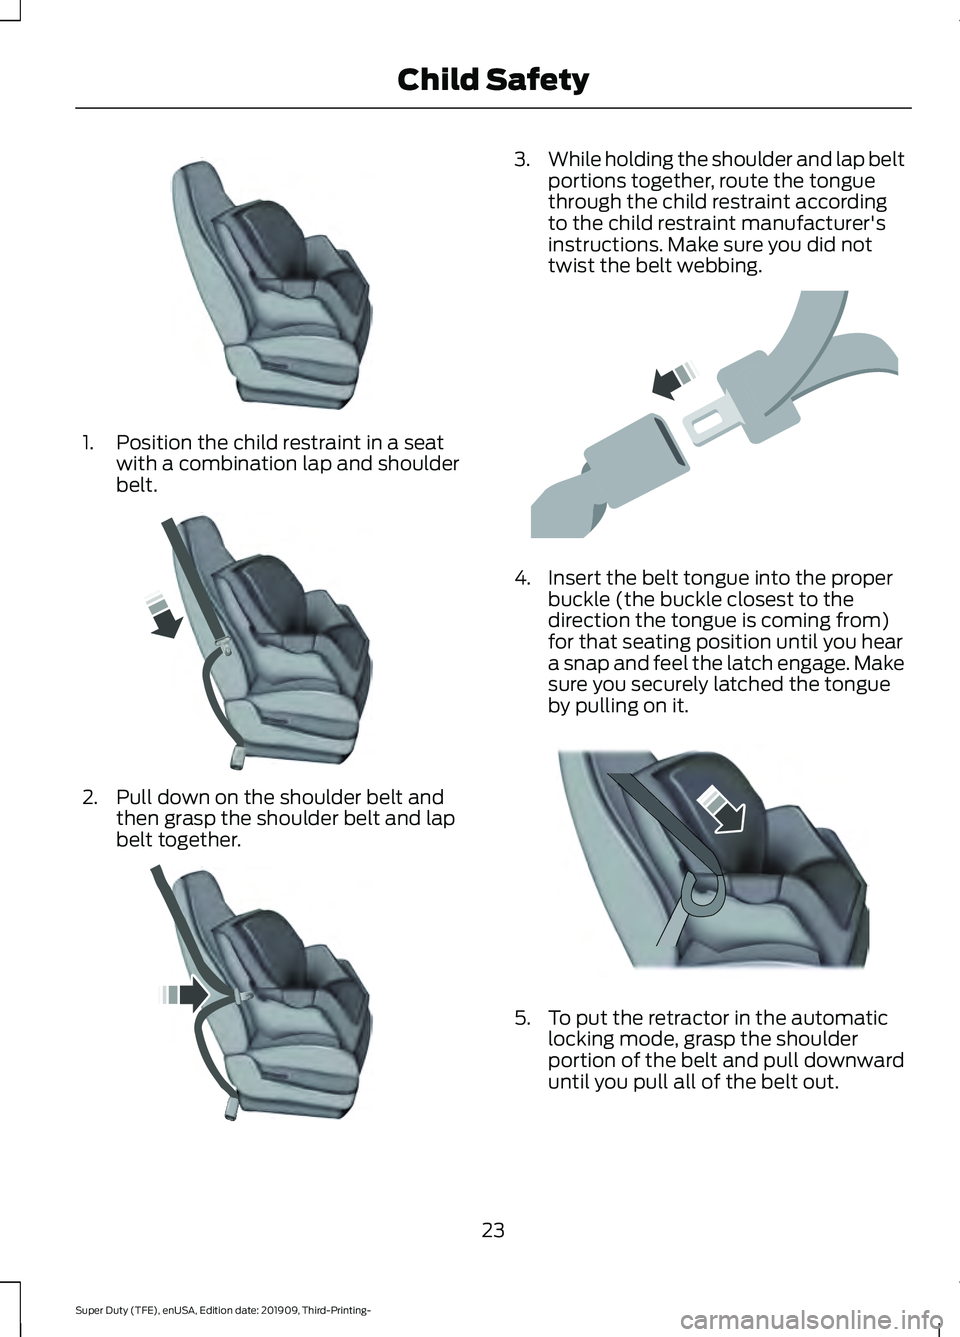 FORD F-350 2020  Owners Manual 1. Position the child restraint in a seat
with a combination lap and shoulder
belt. 2. Pull down on the shoulder belt and
then grasp the shoulder belt and lap
belt together. 3.
While holding the shoul